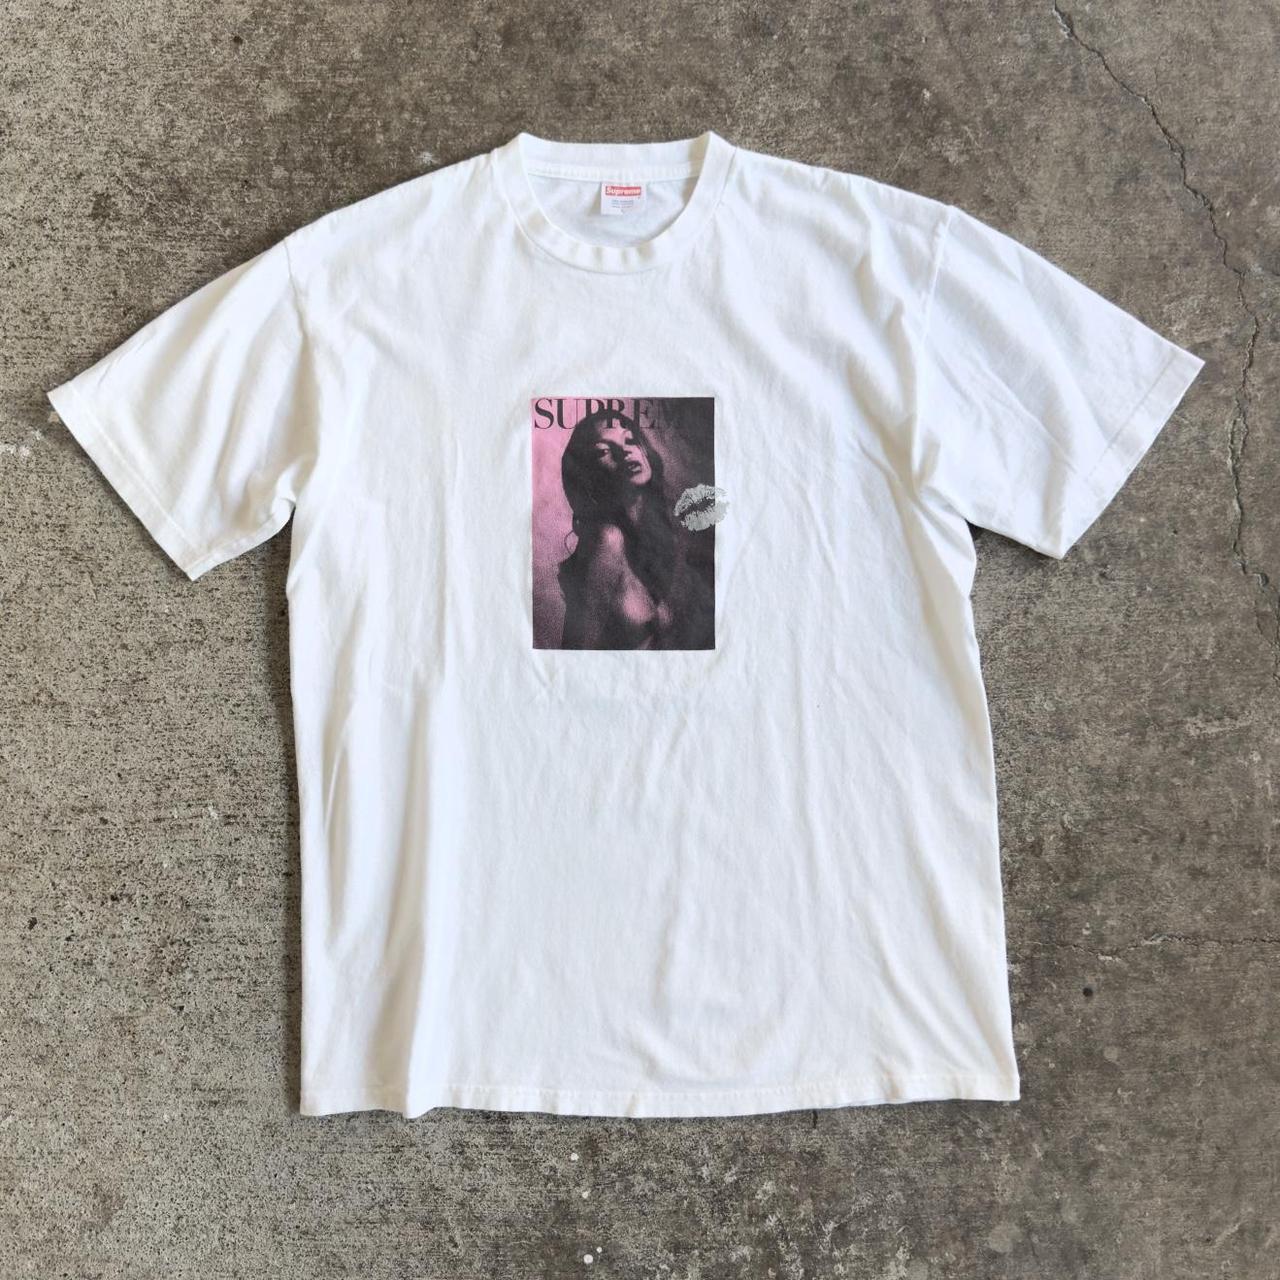 Supreme Kate Moss 2006 Tee, Size Large, In great